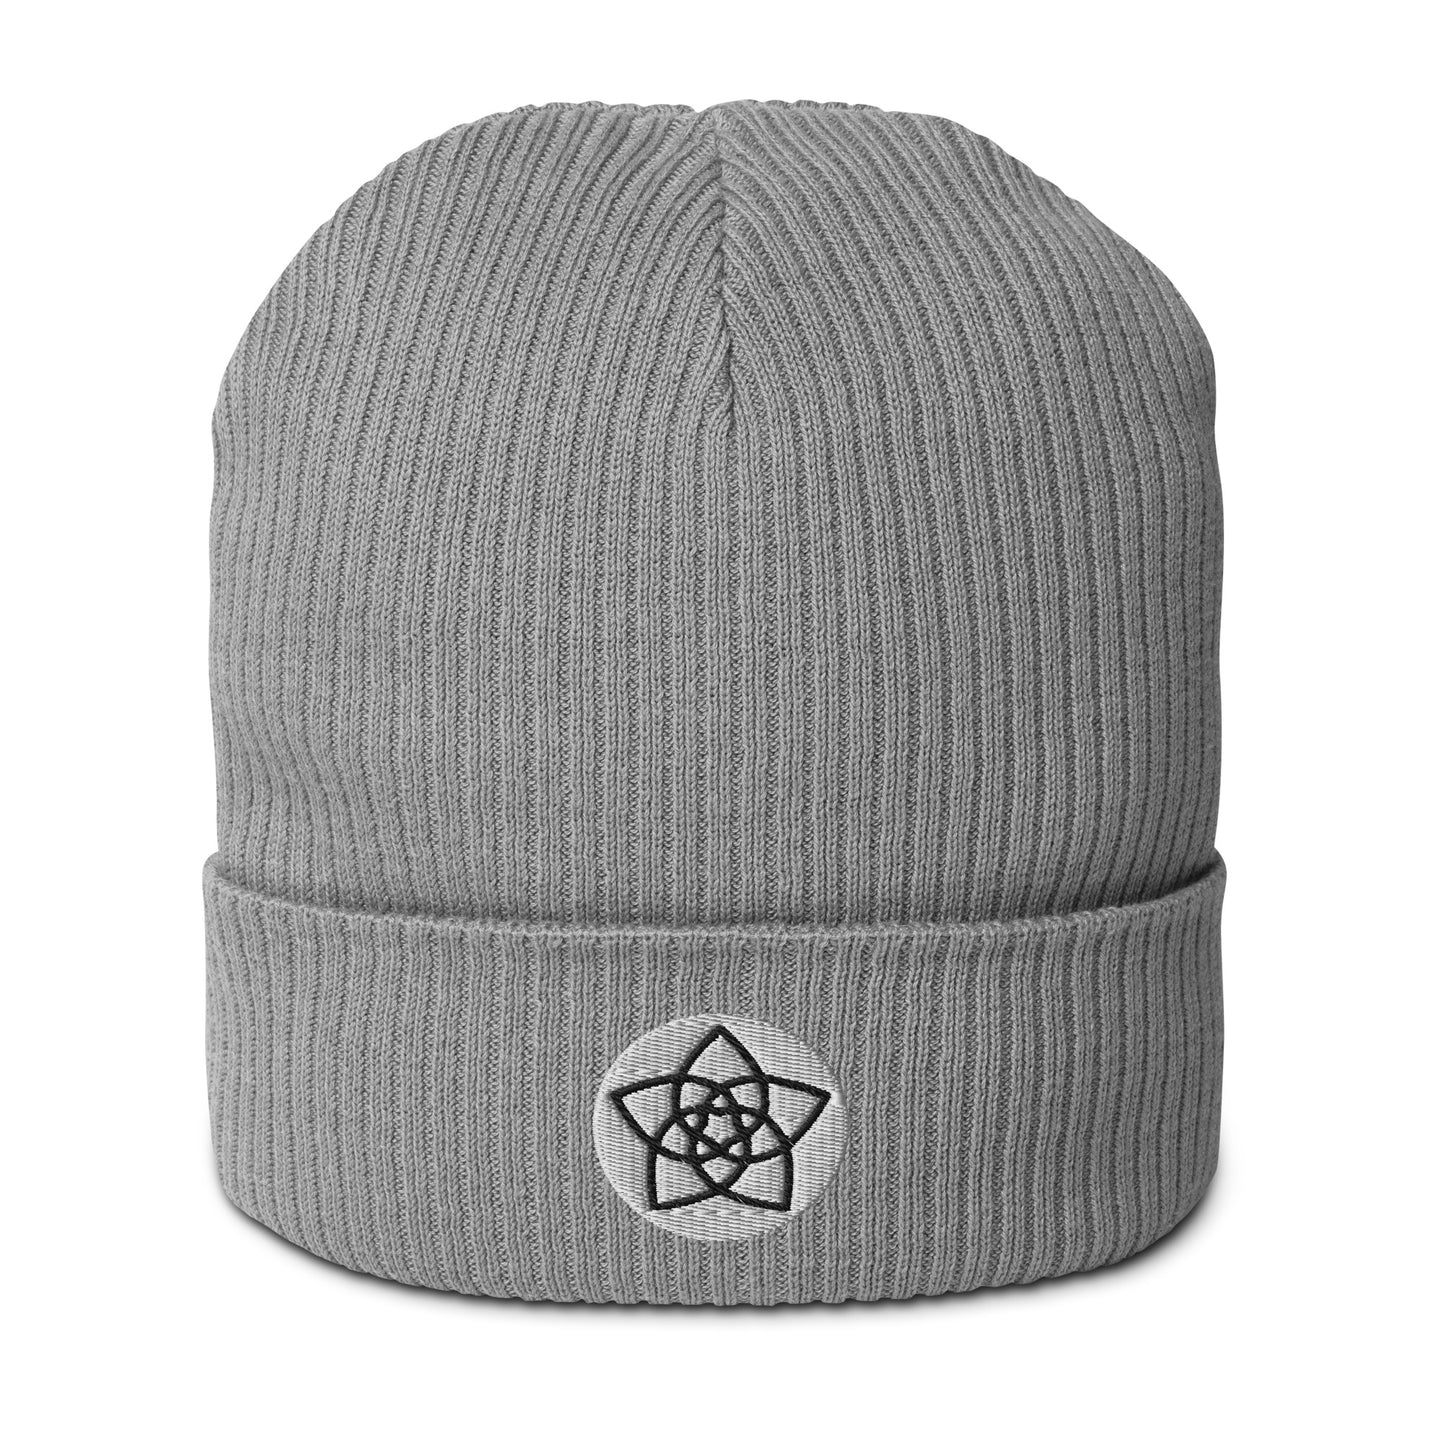 Tune into your inner goddess with our Venus Flower Organic Cotton Beanie in Cloudy Gray. Crafted from organic cotton and embroidered with the Venus Flower symbol, this beanie is a tribute to the divine feminine, blooming with unity, balance, and celestial connections. Plus, it's made with breathable, lightweight fabric and natural materials, ensuring you feel as light as a petal while you're on your celestial journey. Snatch one of these beanies and infuse your style with a touch of Venusian magic.